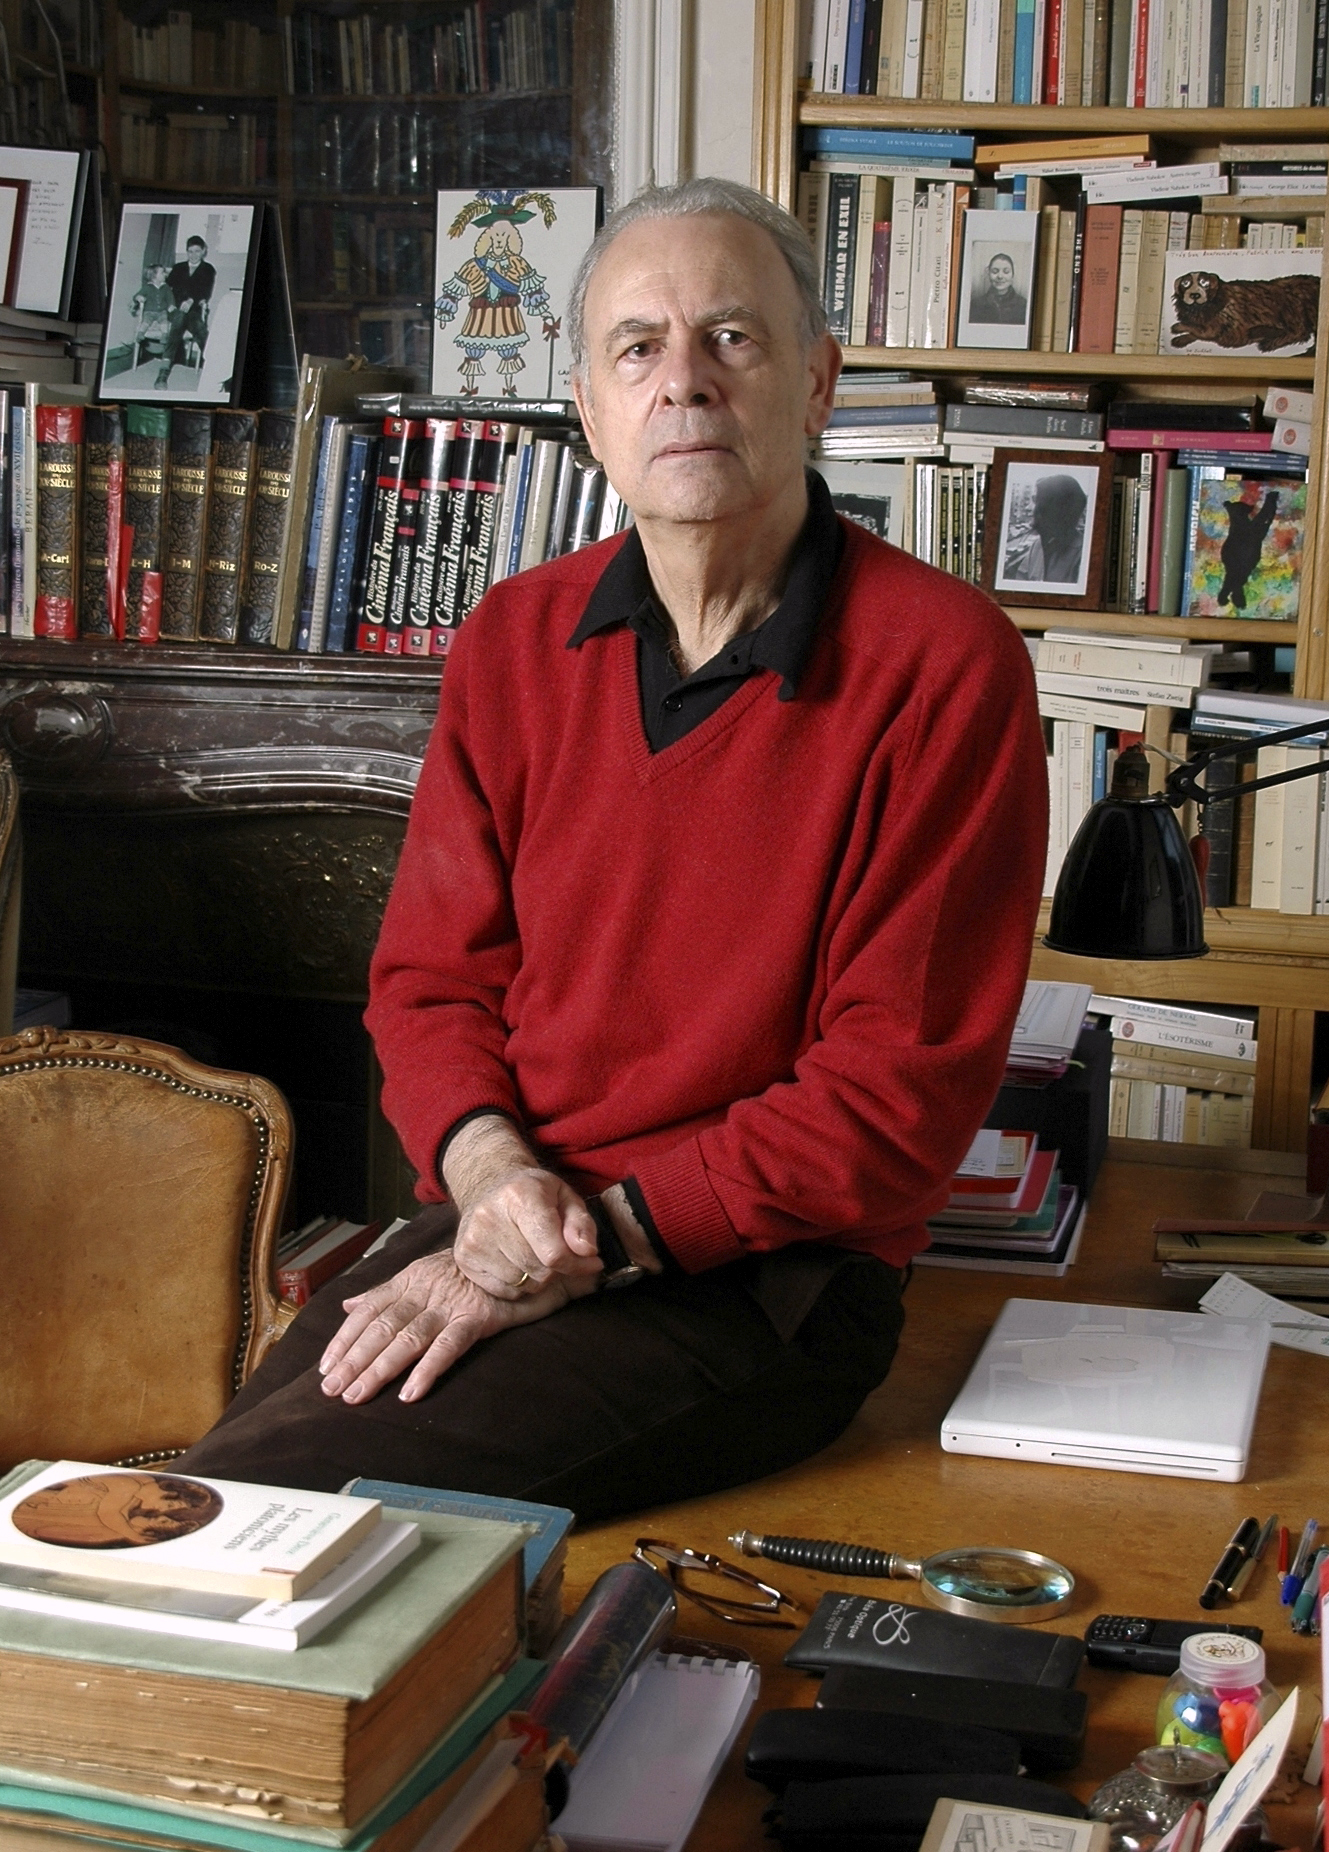 French novelist Patrick Modiano poses for a photograph. Patrick Modiano of France has won the 2014 Nobel Prize for Literature. (AP—AP/Gallimard)